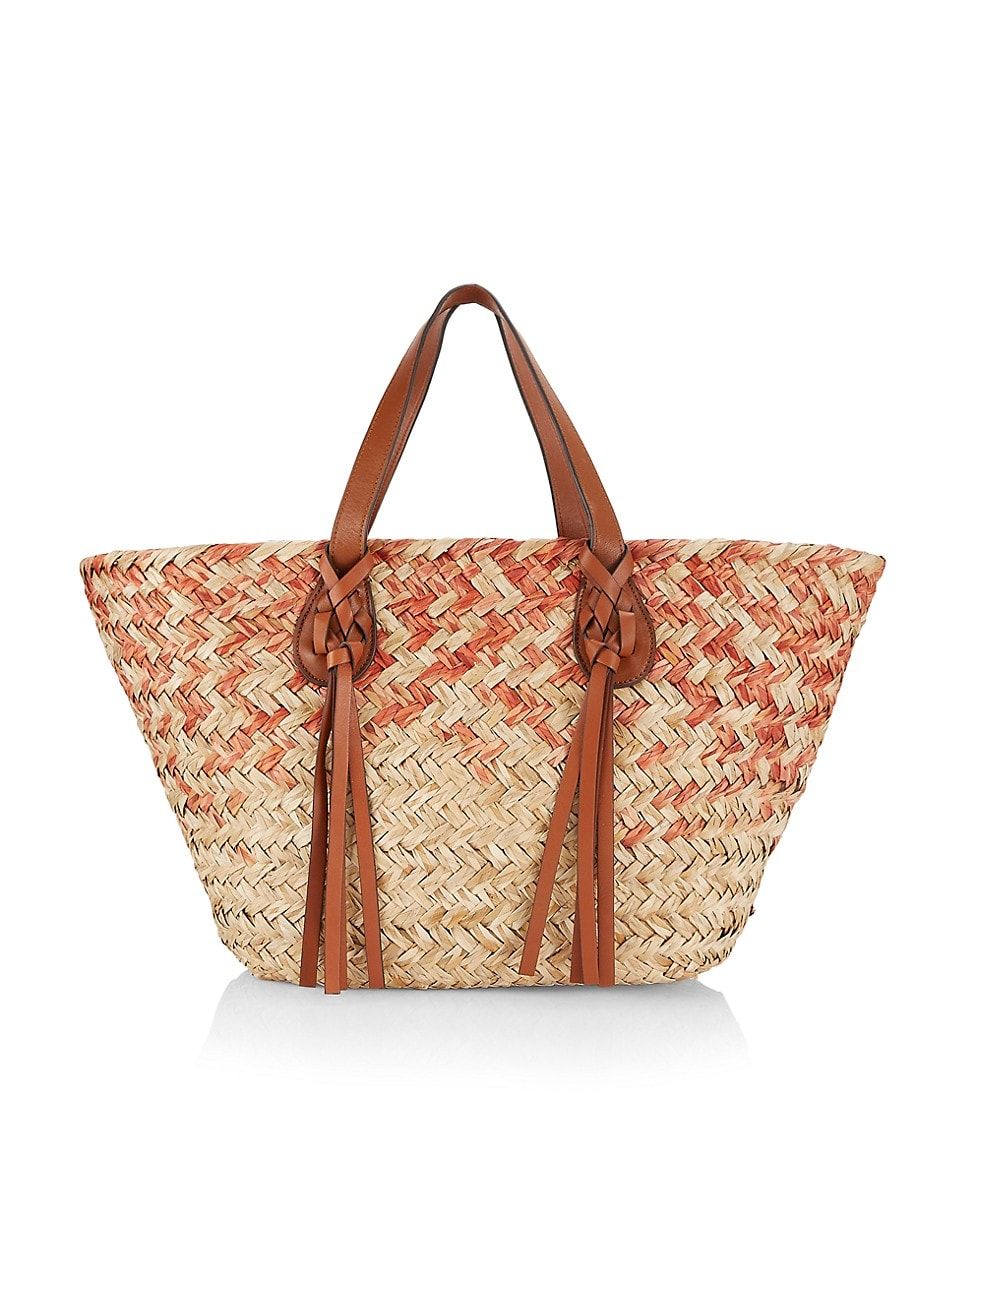 Surfside Straw Carryall Tote | Saks Fifth Avenue